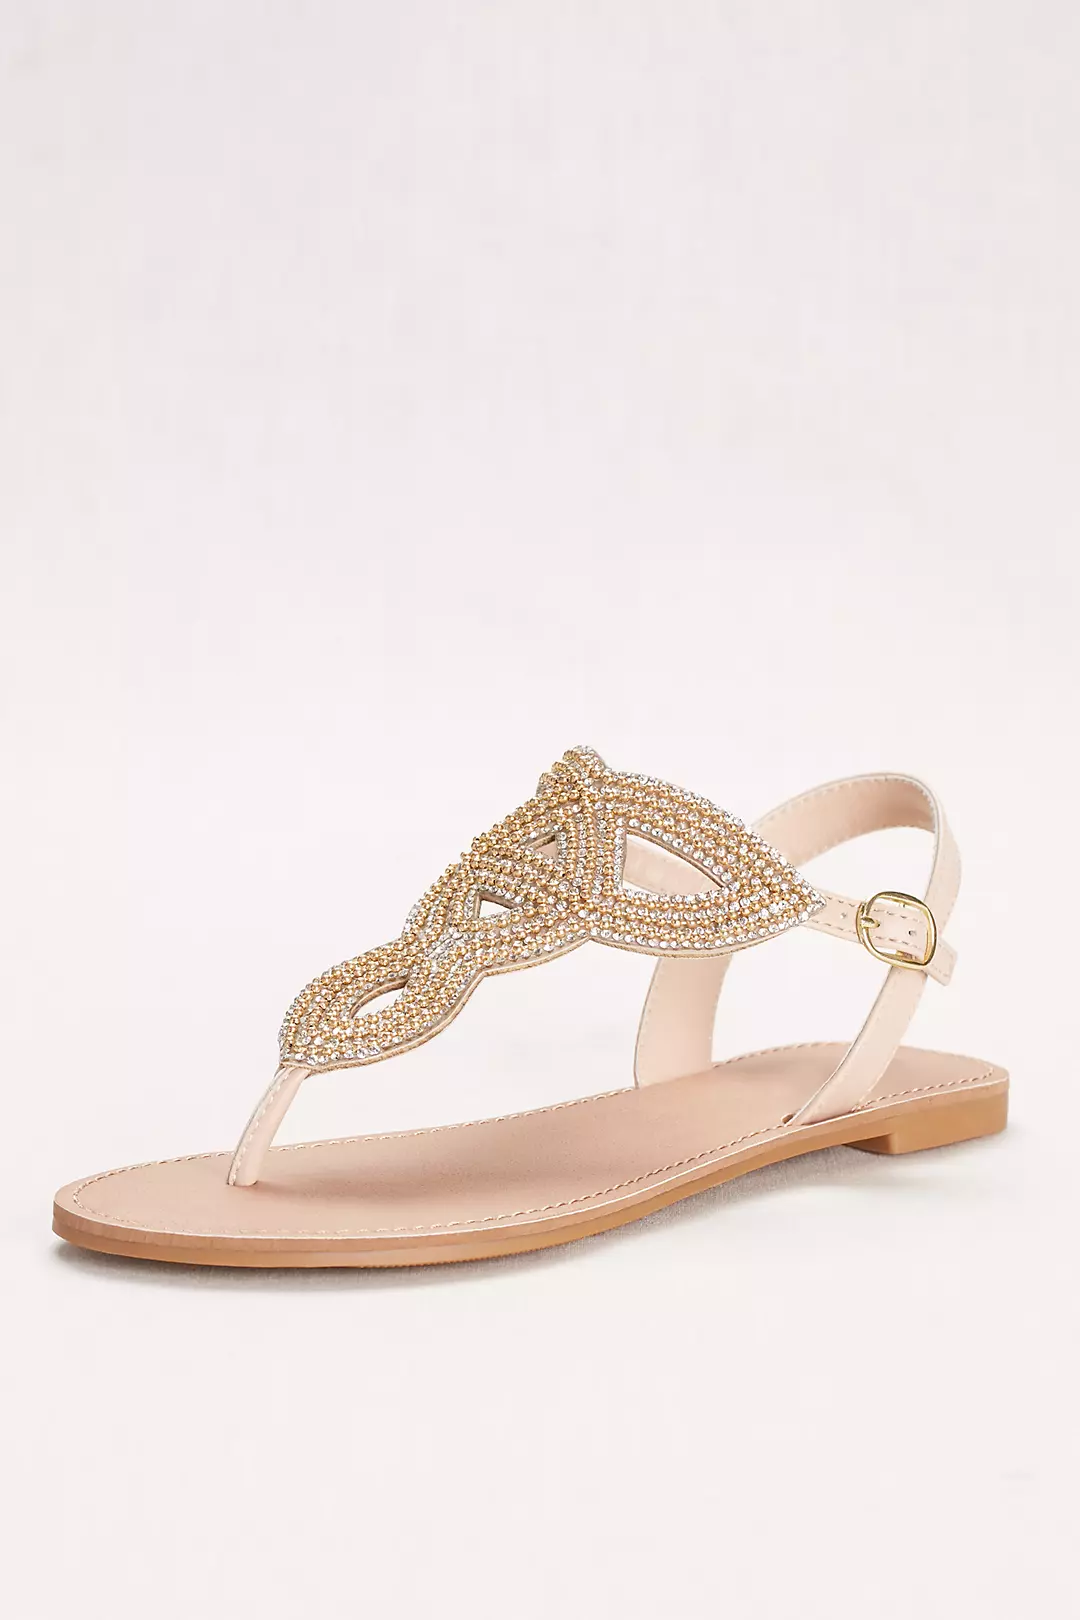 Swirling Bead and Crystal T-Strap Sandal Image